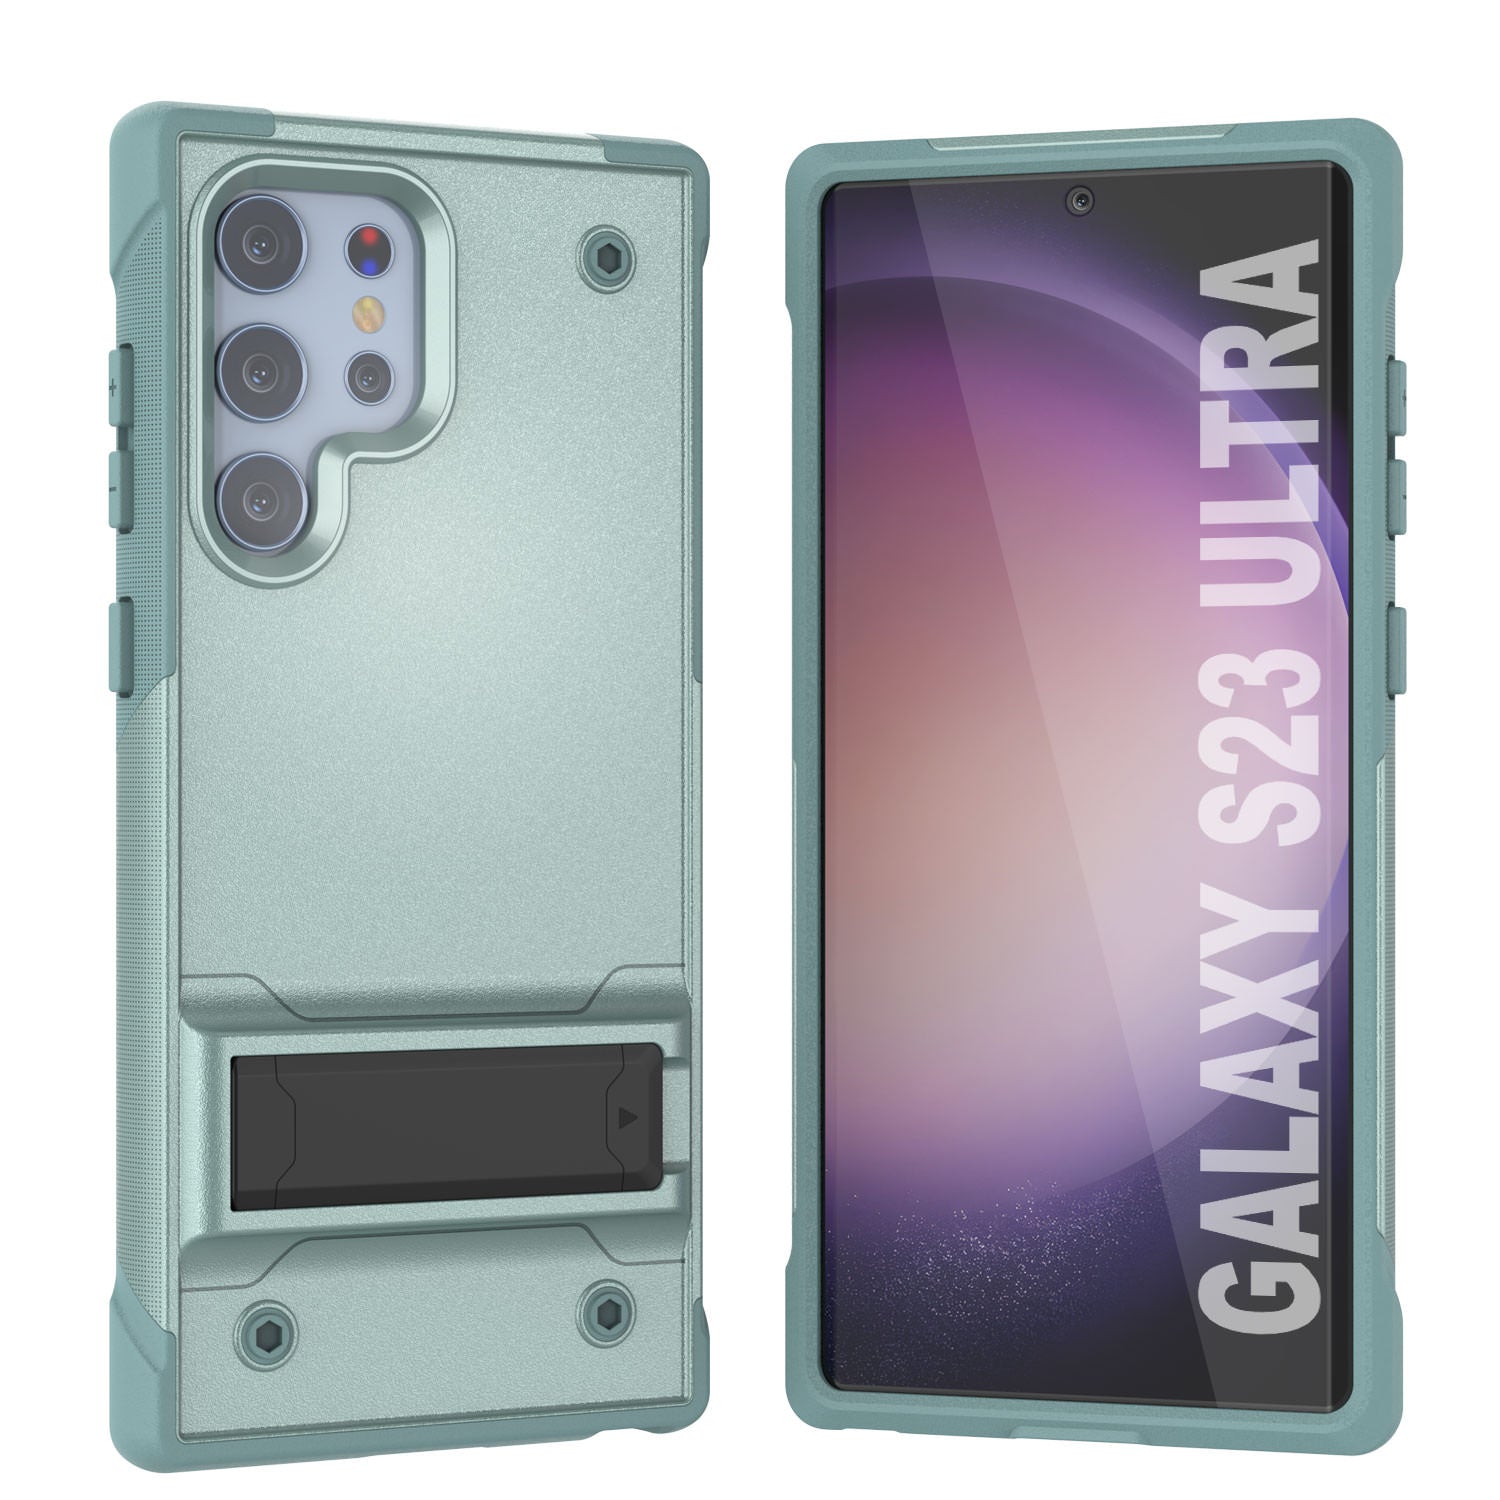 Punkcase Galaxy S23 Ultra Case [Reliance Series] Protective Hybrid Military Grade Cover W/Built-in Kickstand [Green]